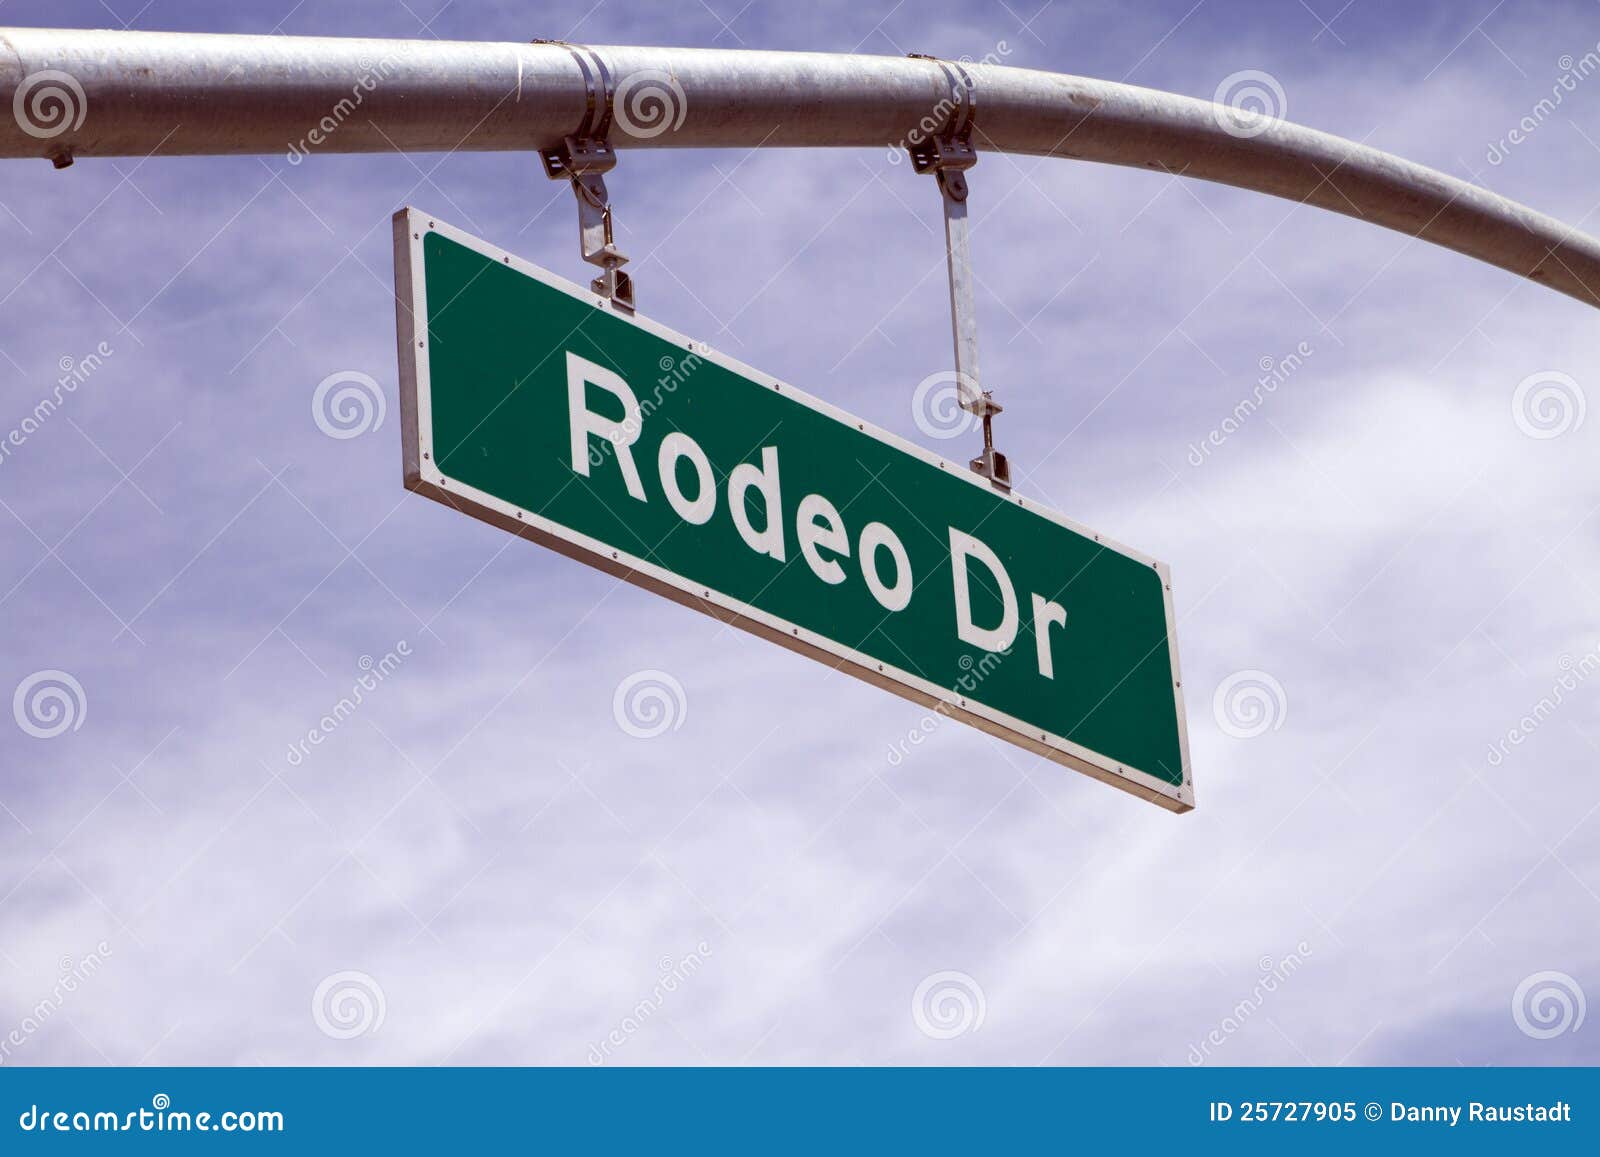 rodeo drive street sign in beverly hills, ca